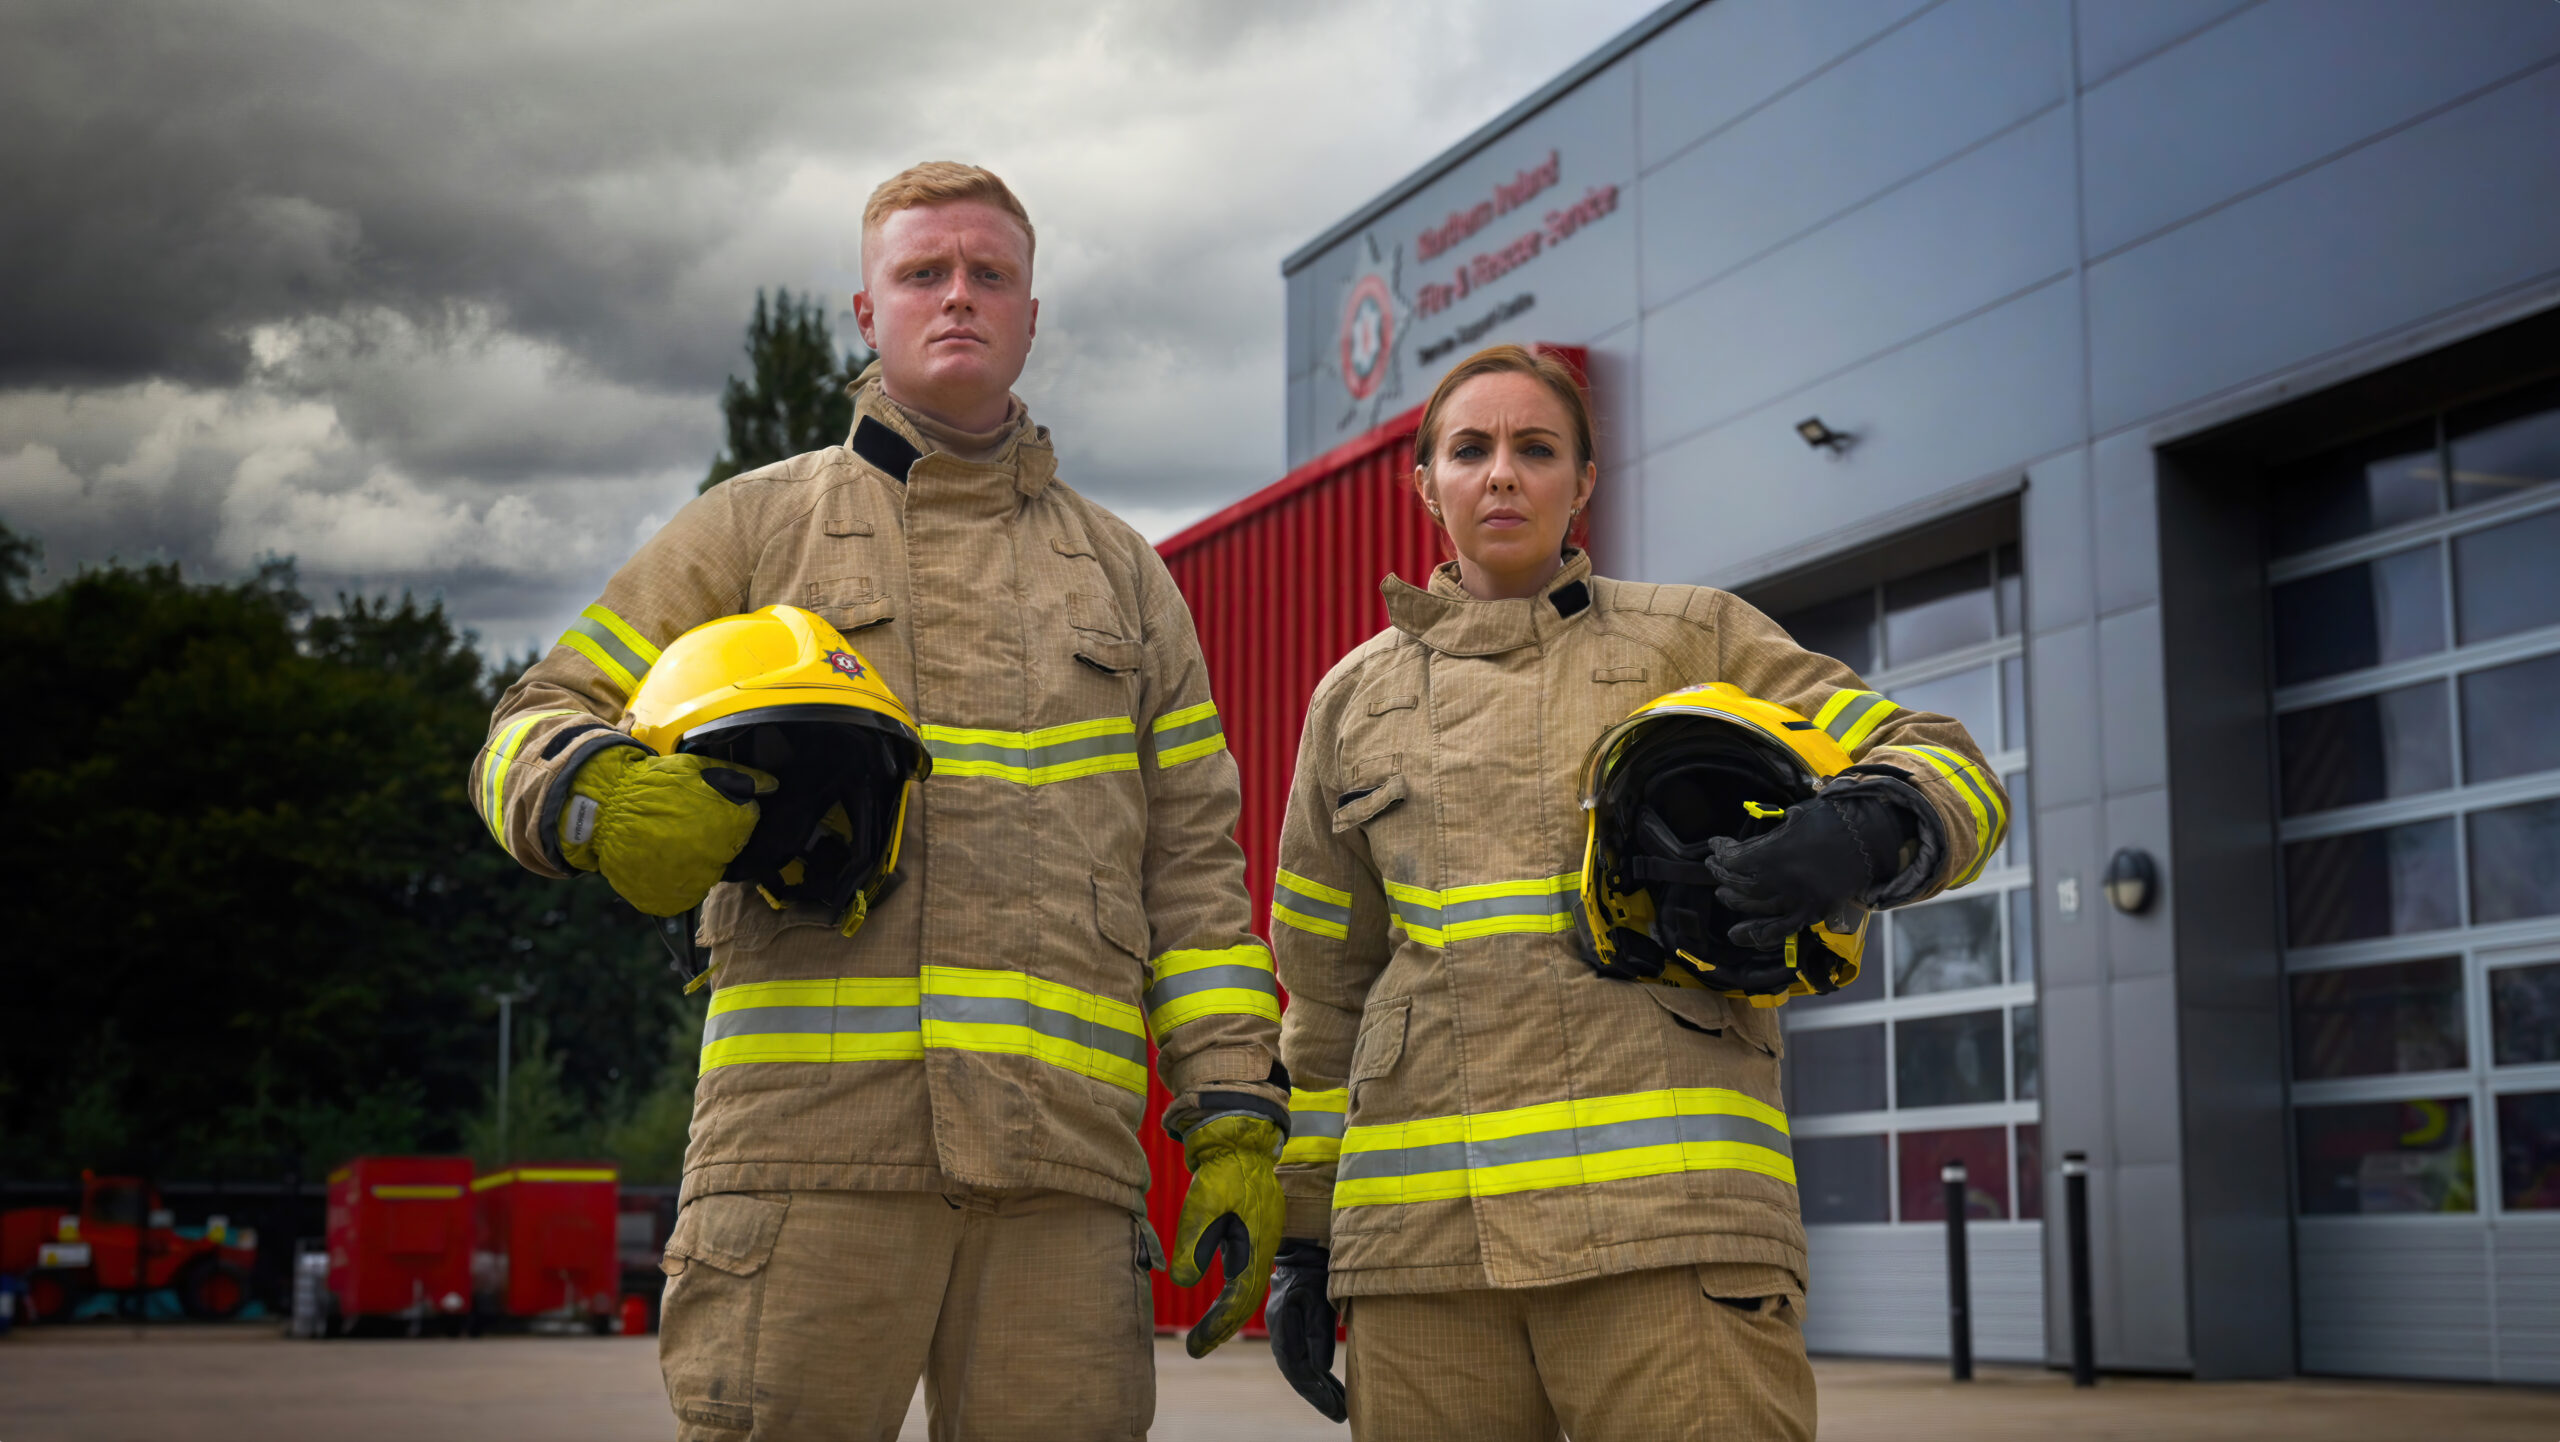 Male and Female Firefighters outside Fire Service Building.